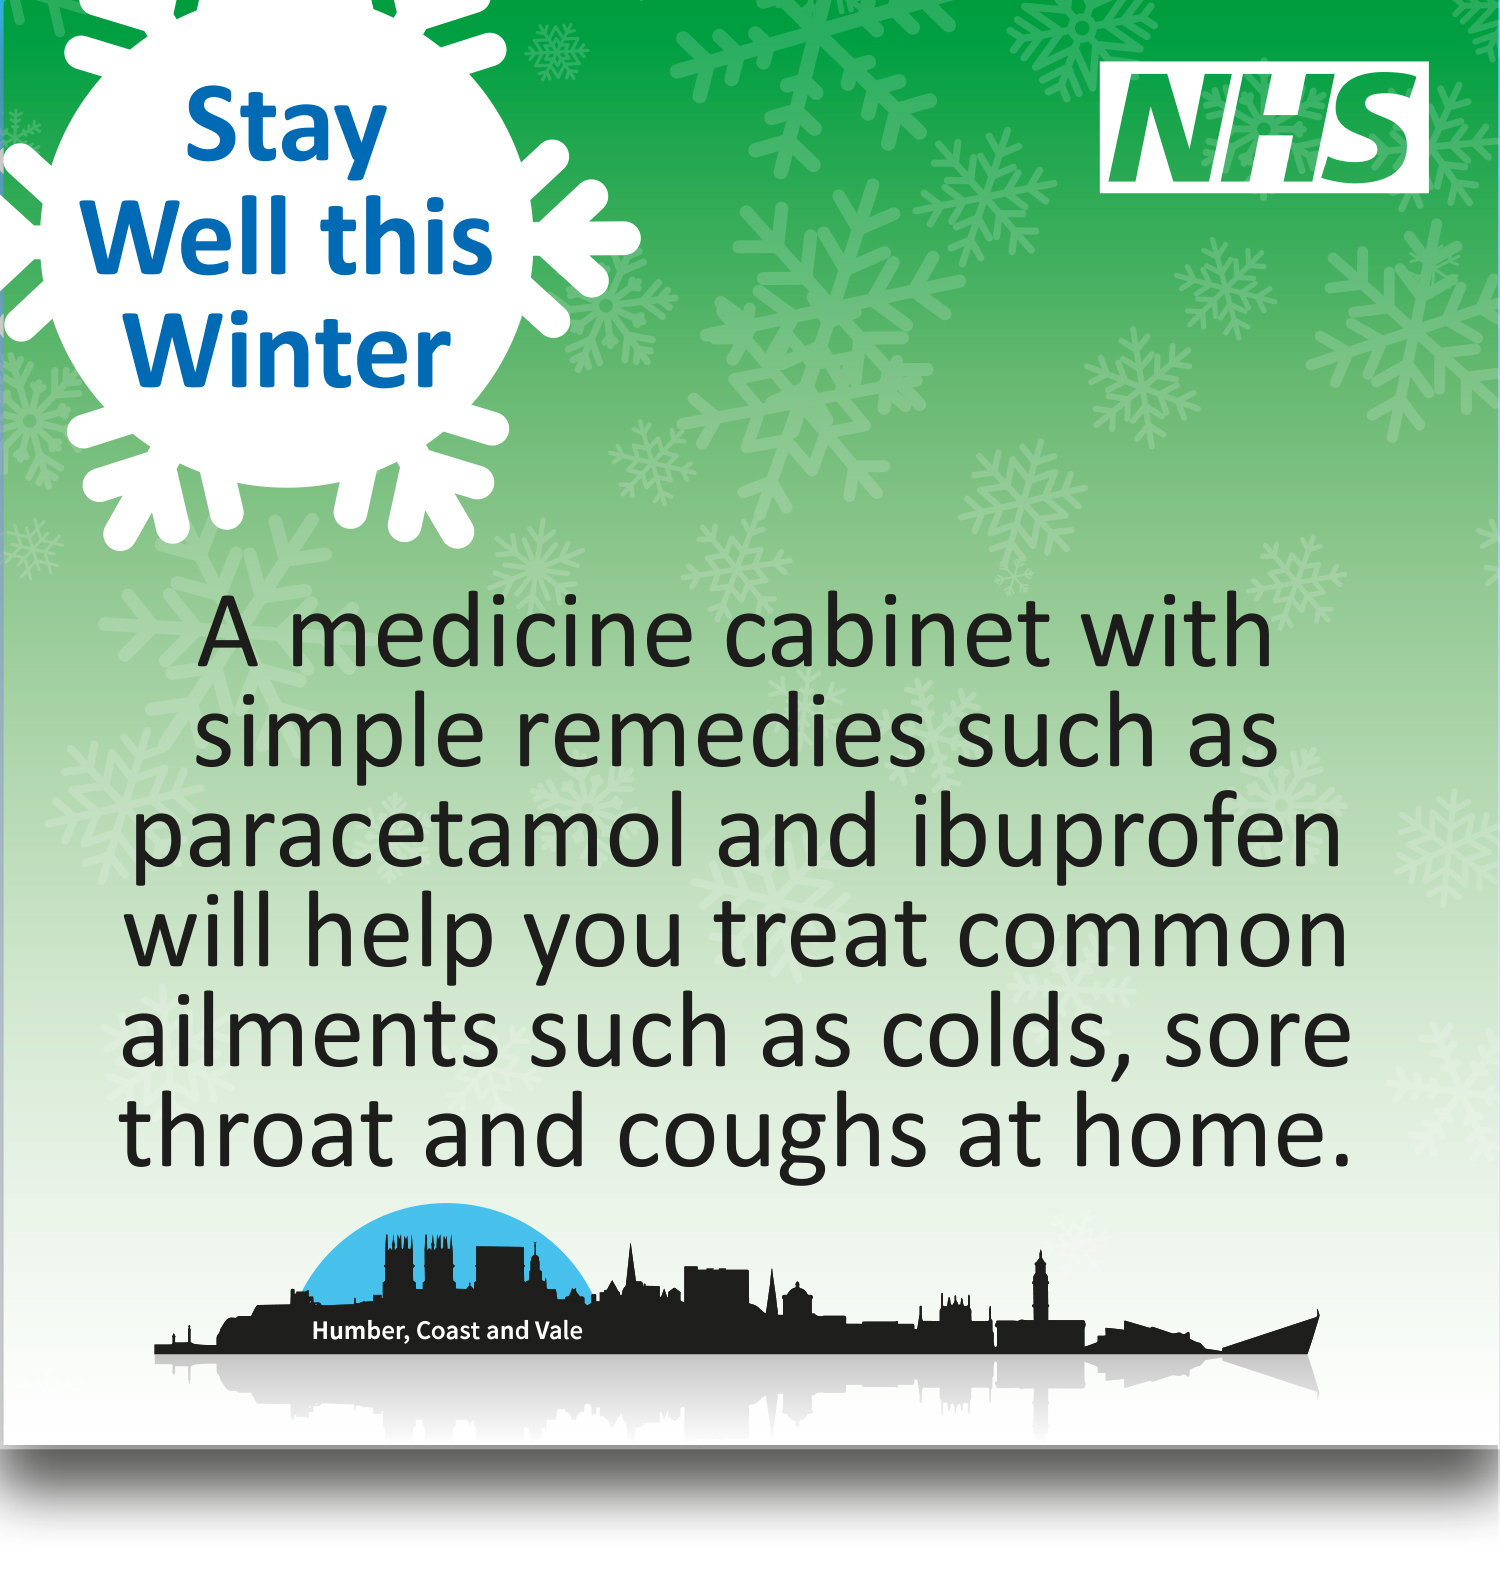 Stay well this winter. A medicine cabinet with simple remedies such as paracetamol and ibuprofen will help you treat common ailments such as colds, sore throat and coughs at home